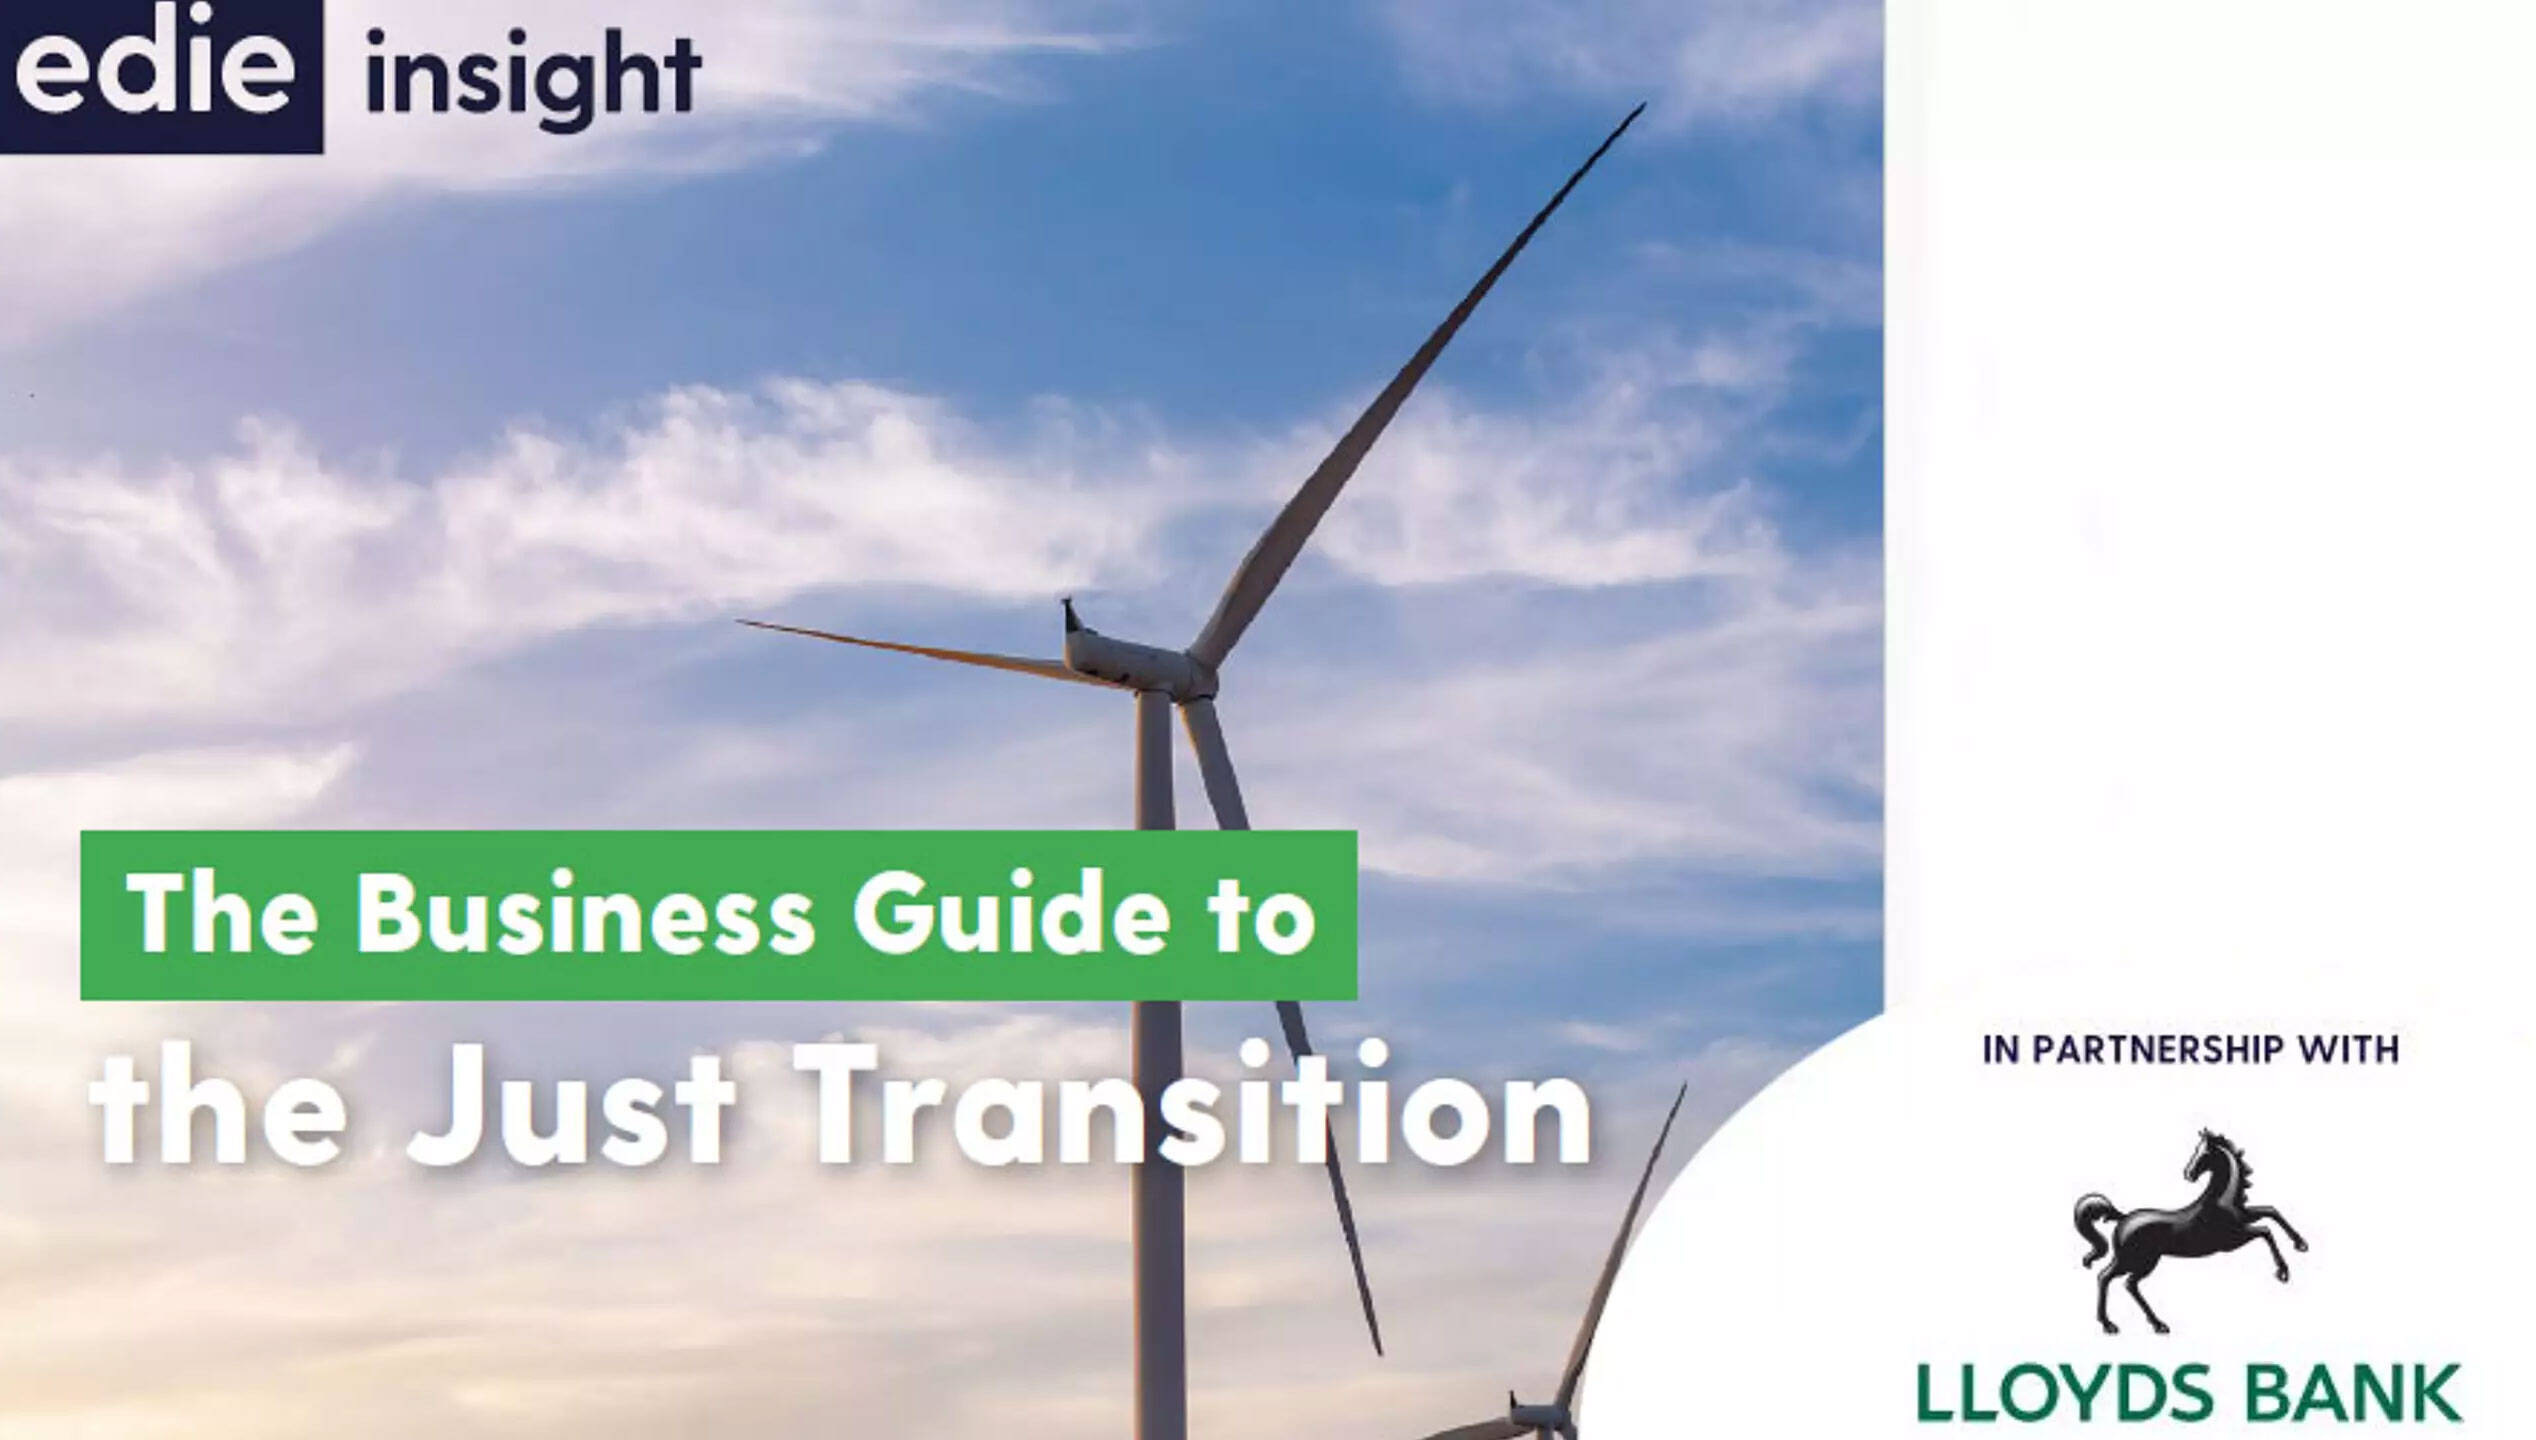 edie and Lloyds Bank launch new business guide to the Just Transition